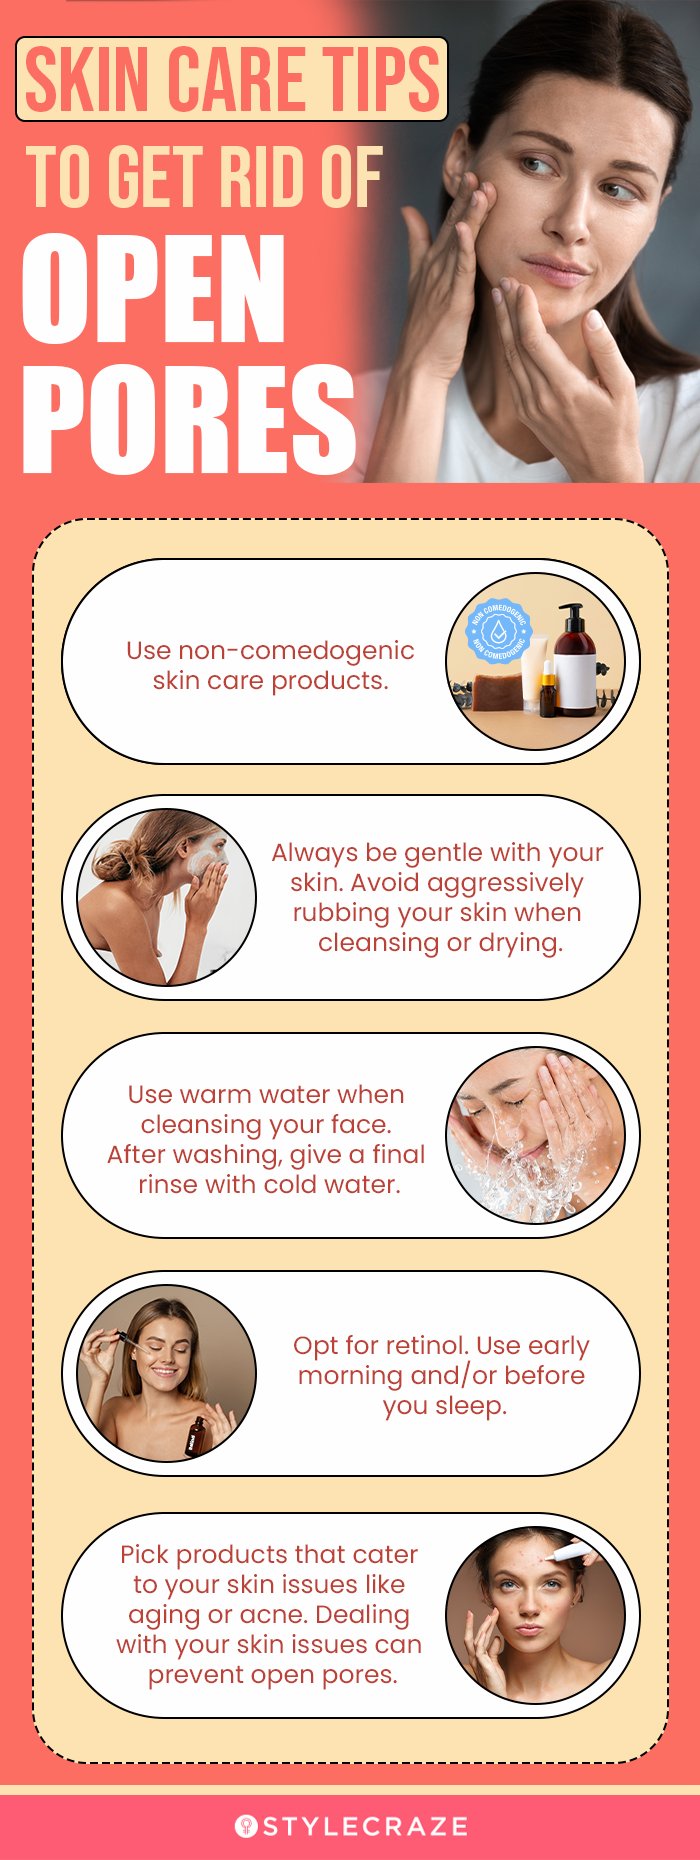 skin care tips to get rid of open pores [infographic]